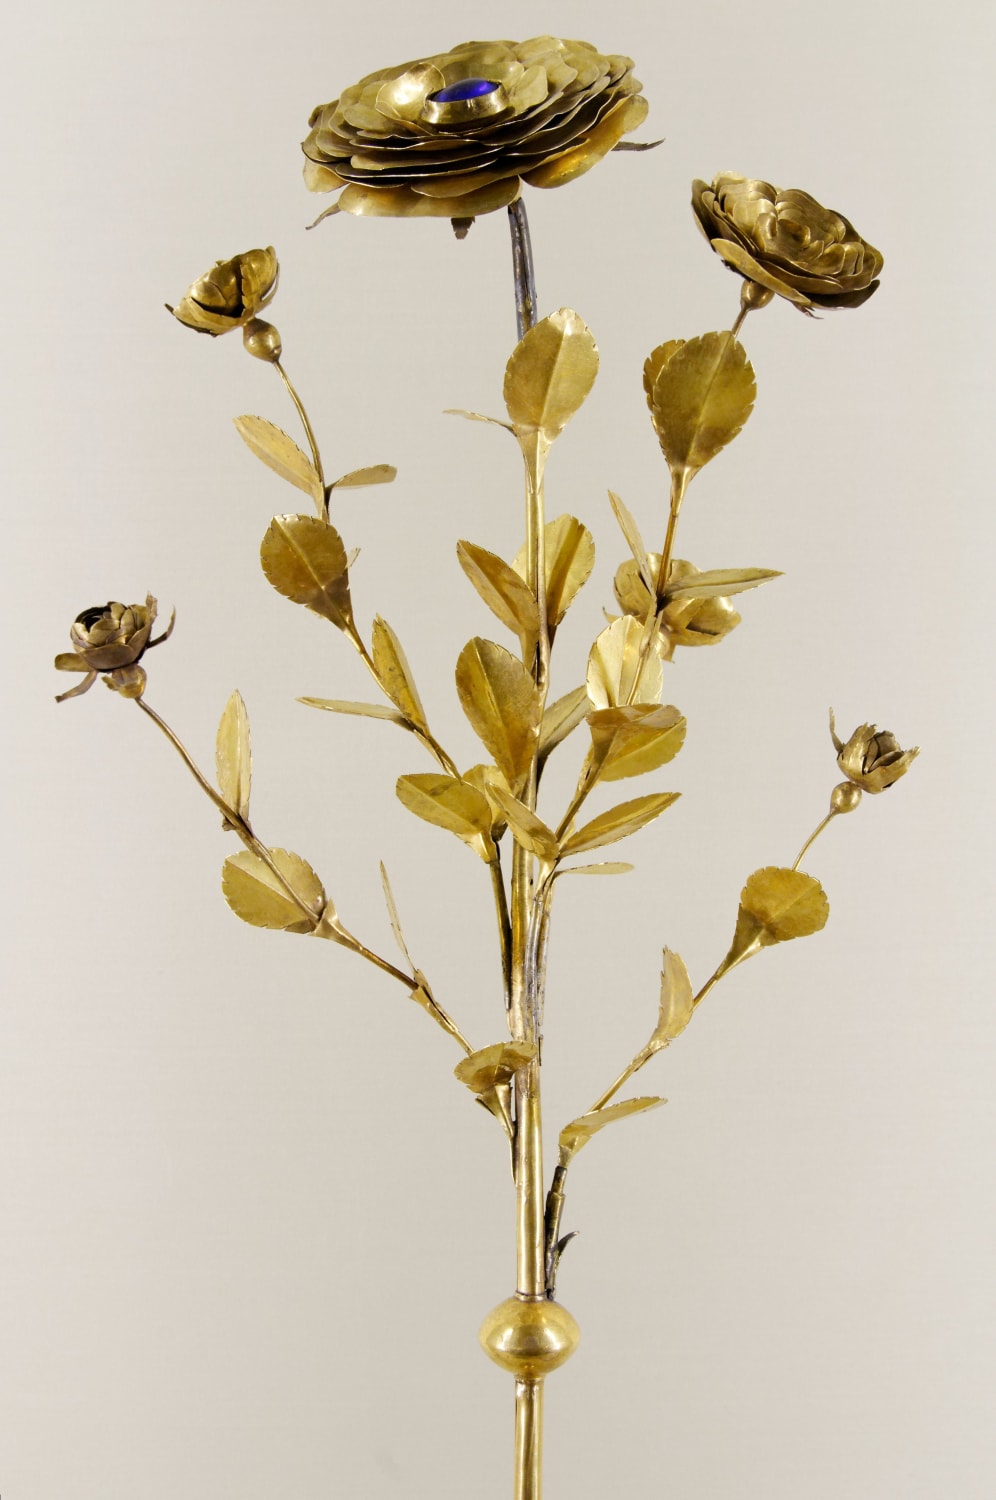 Pope John XXII's Golden Rose donated to Rudolf III of Nidau, now at the Musée National du Moyen Âge in Paris